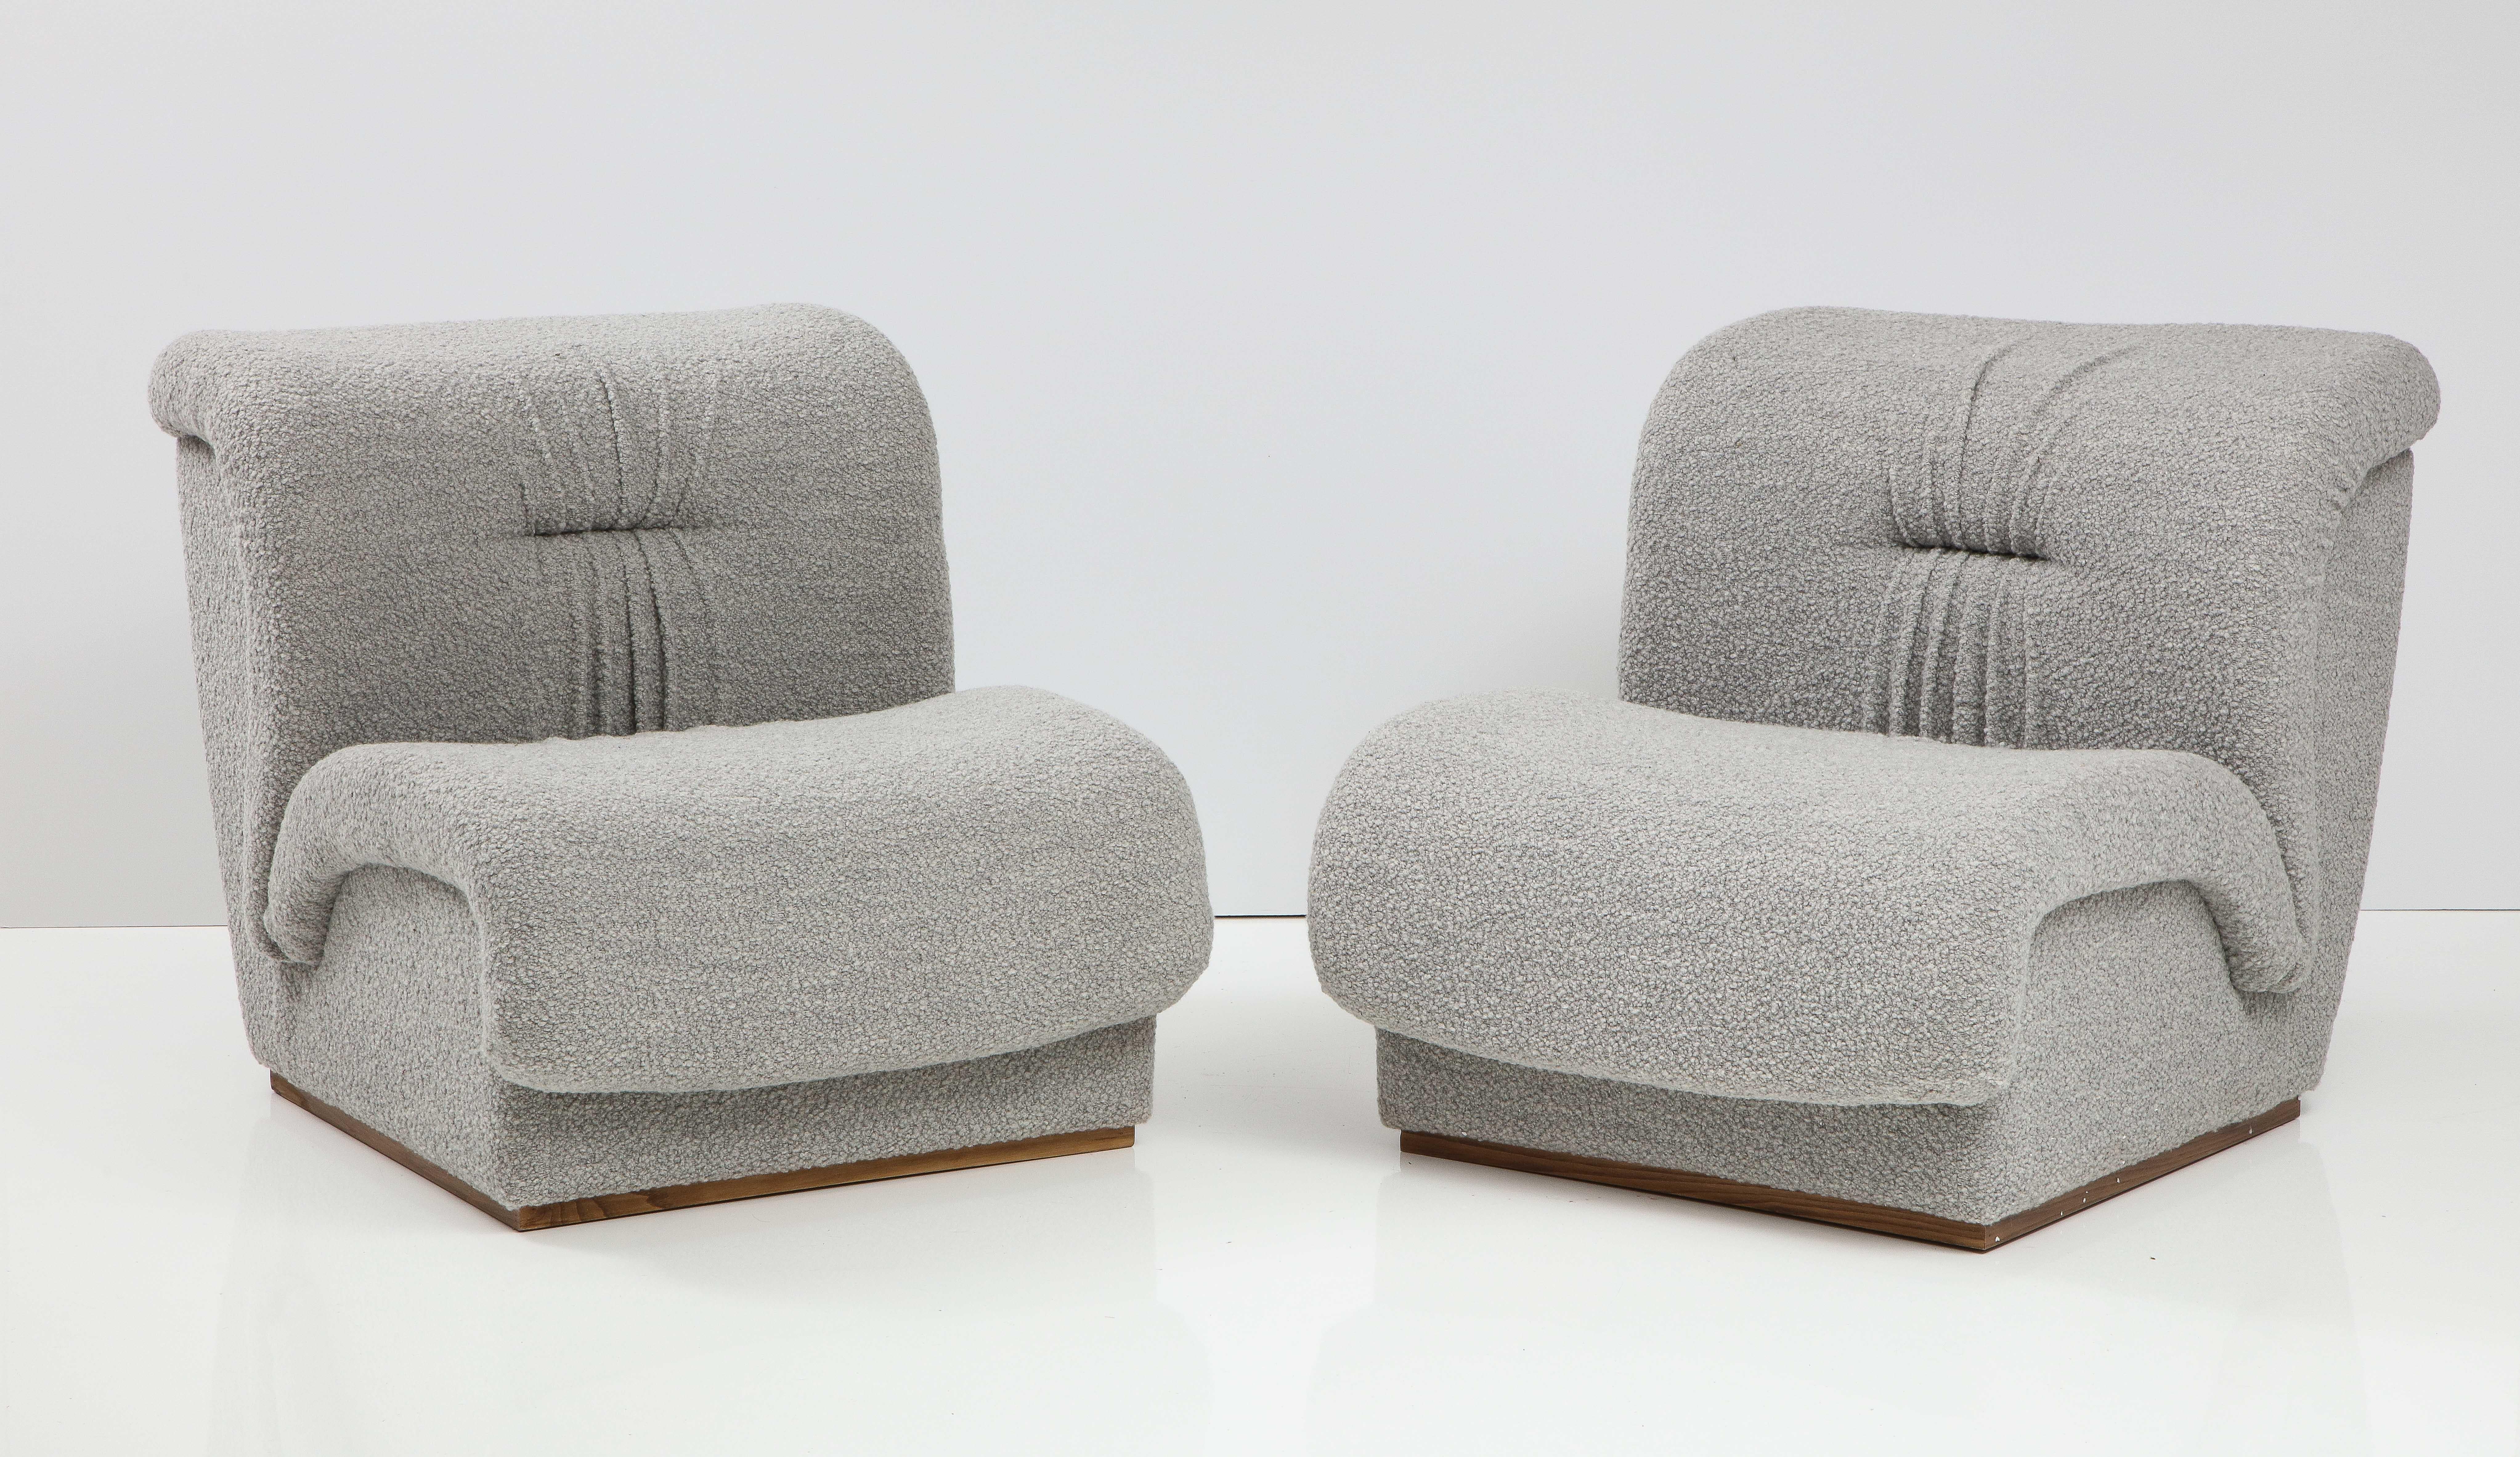 Italian Pair of Slipper Lounge Chairs in Grey Boucle by Doimo Salotti, Italy, circa 1970 For Sale